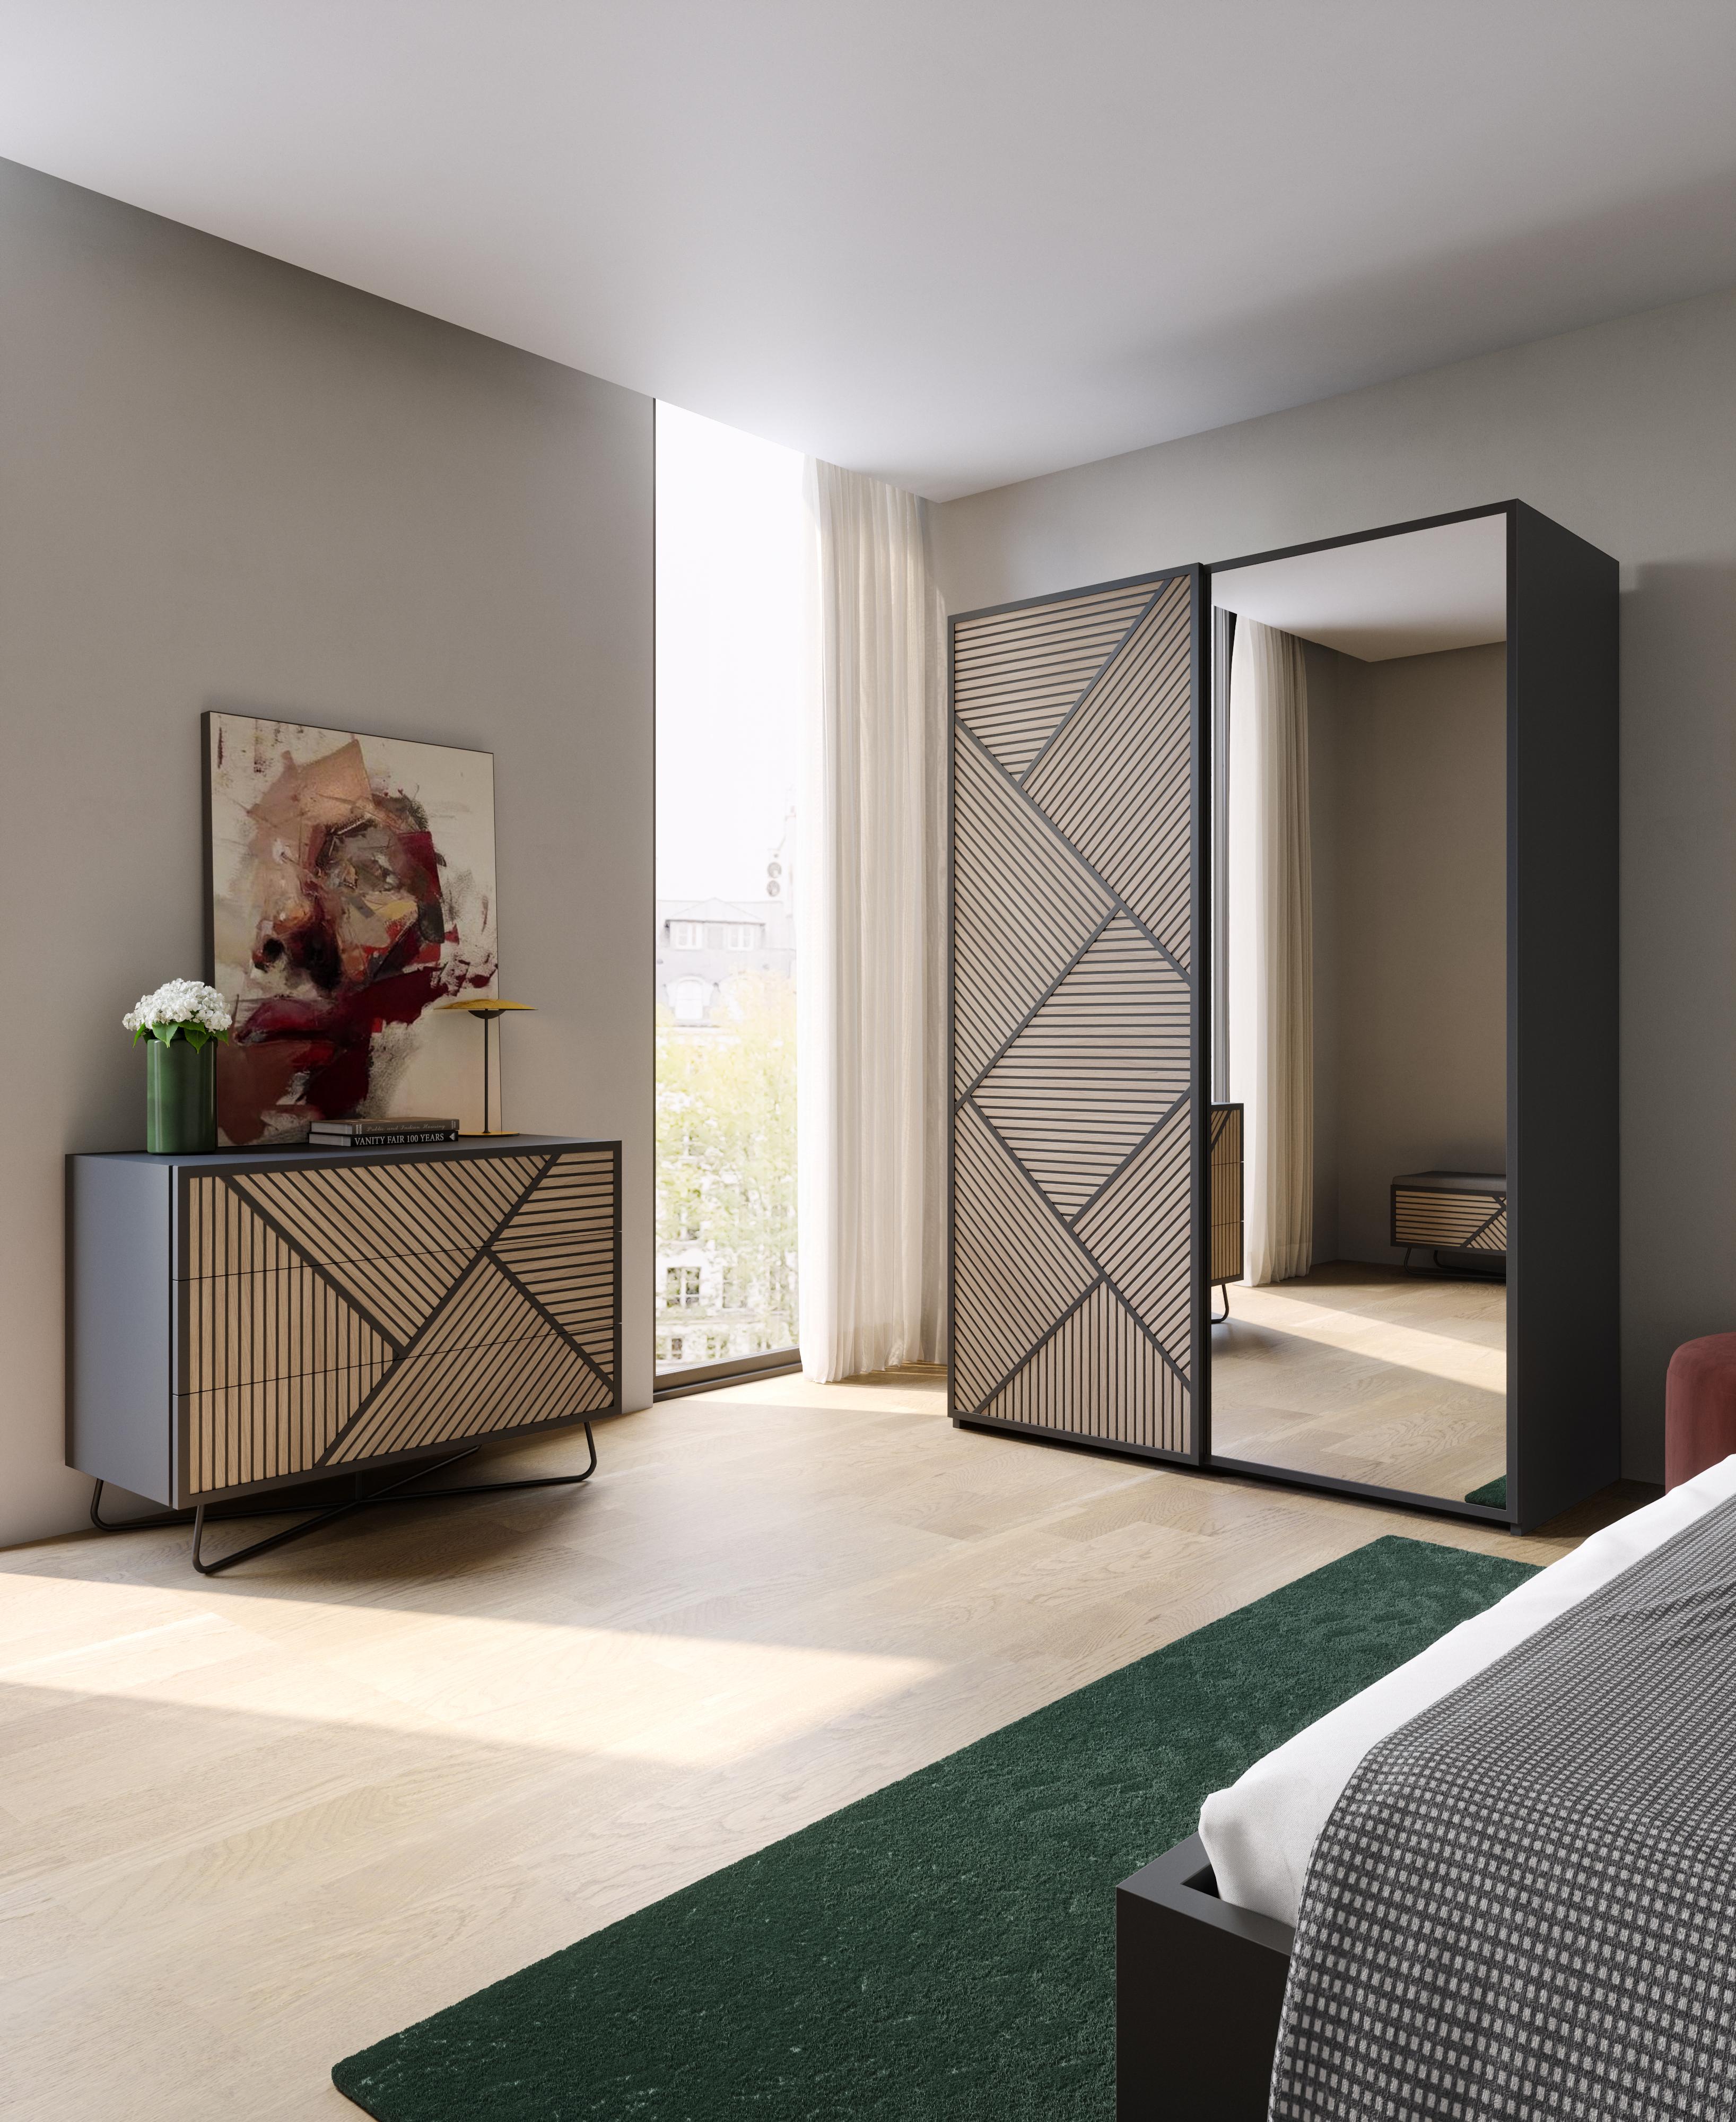 The combination of the black base of its pieces and oak veneer geometric patterns, give this collection a modern, elegant and timeless character.

Modern and widely customizable with different colors and finishes. The perfect collection to fit any